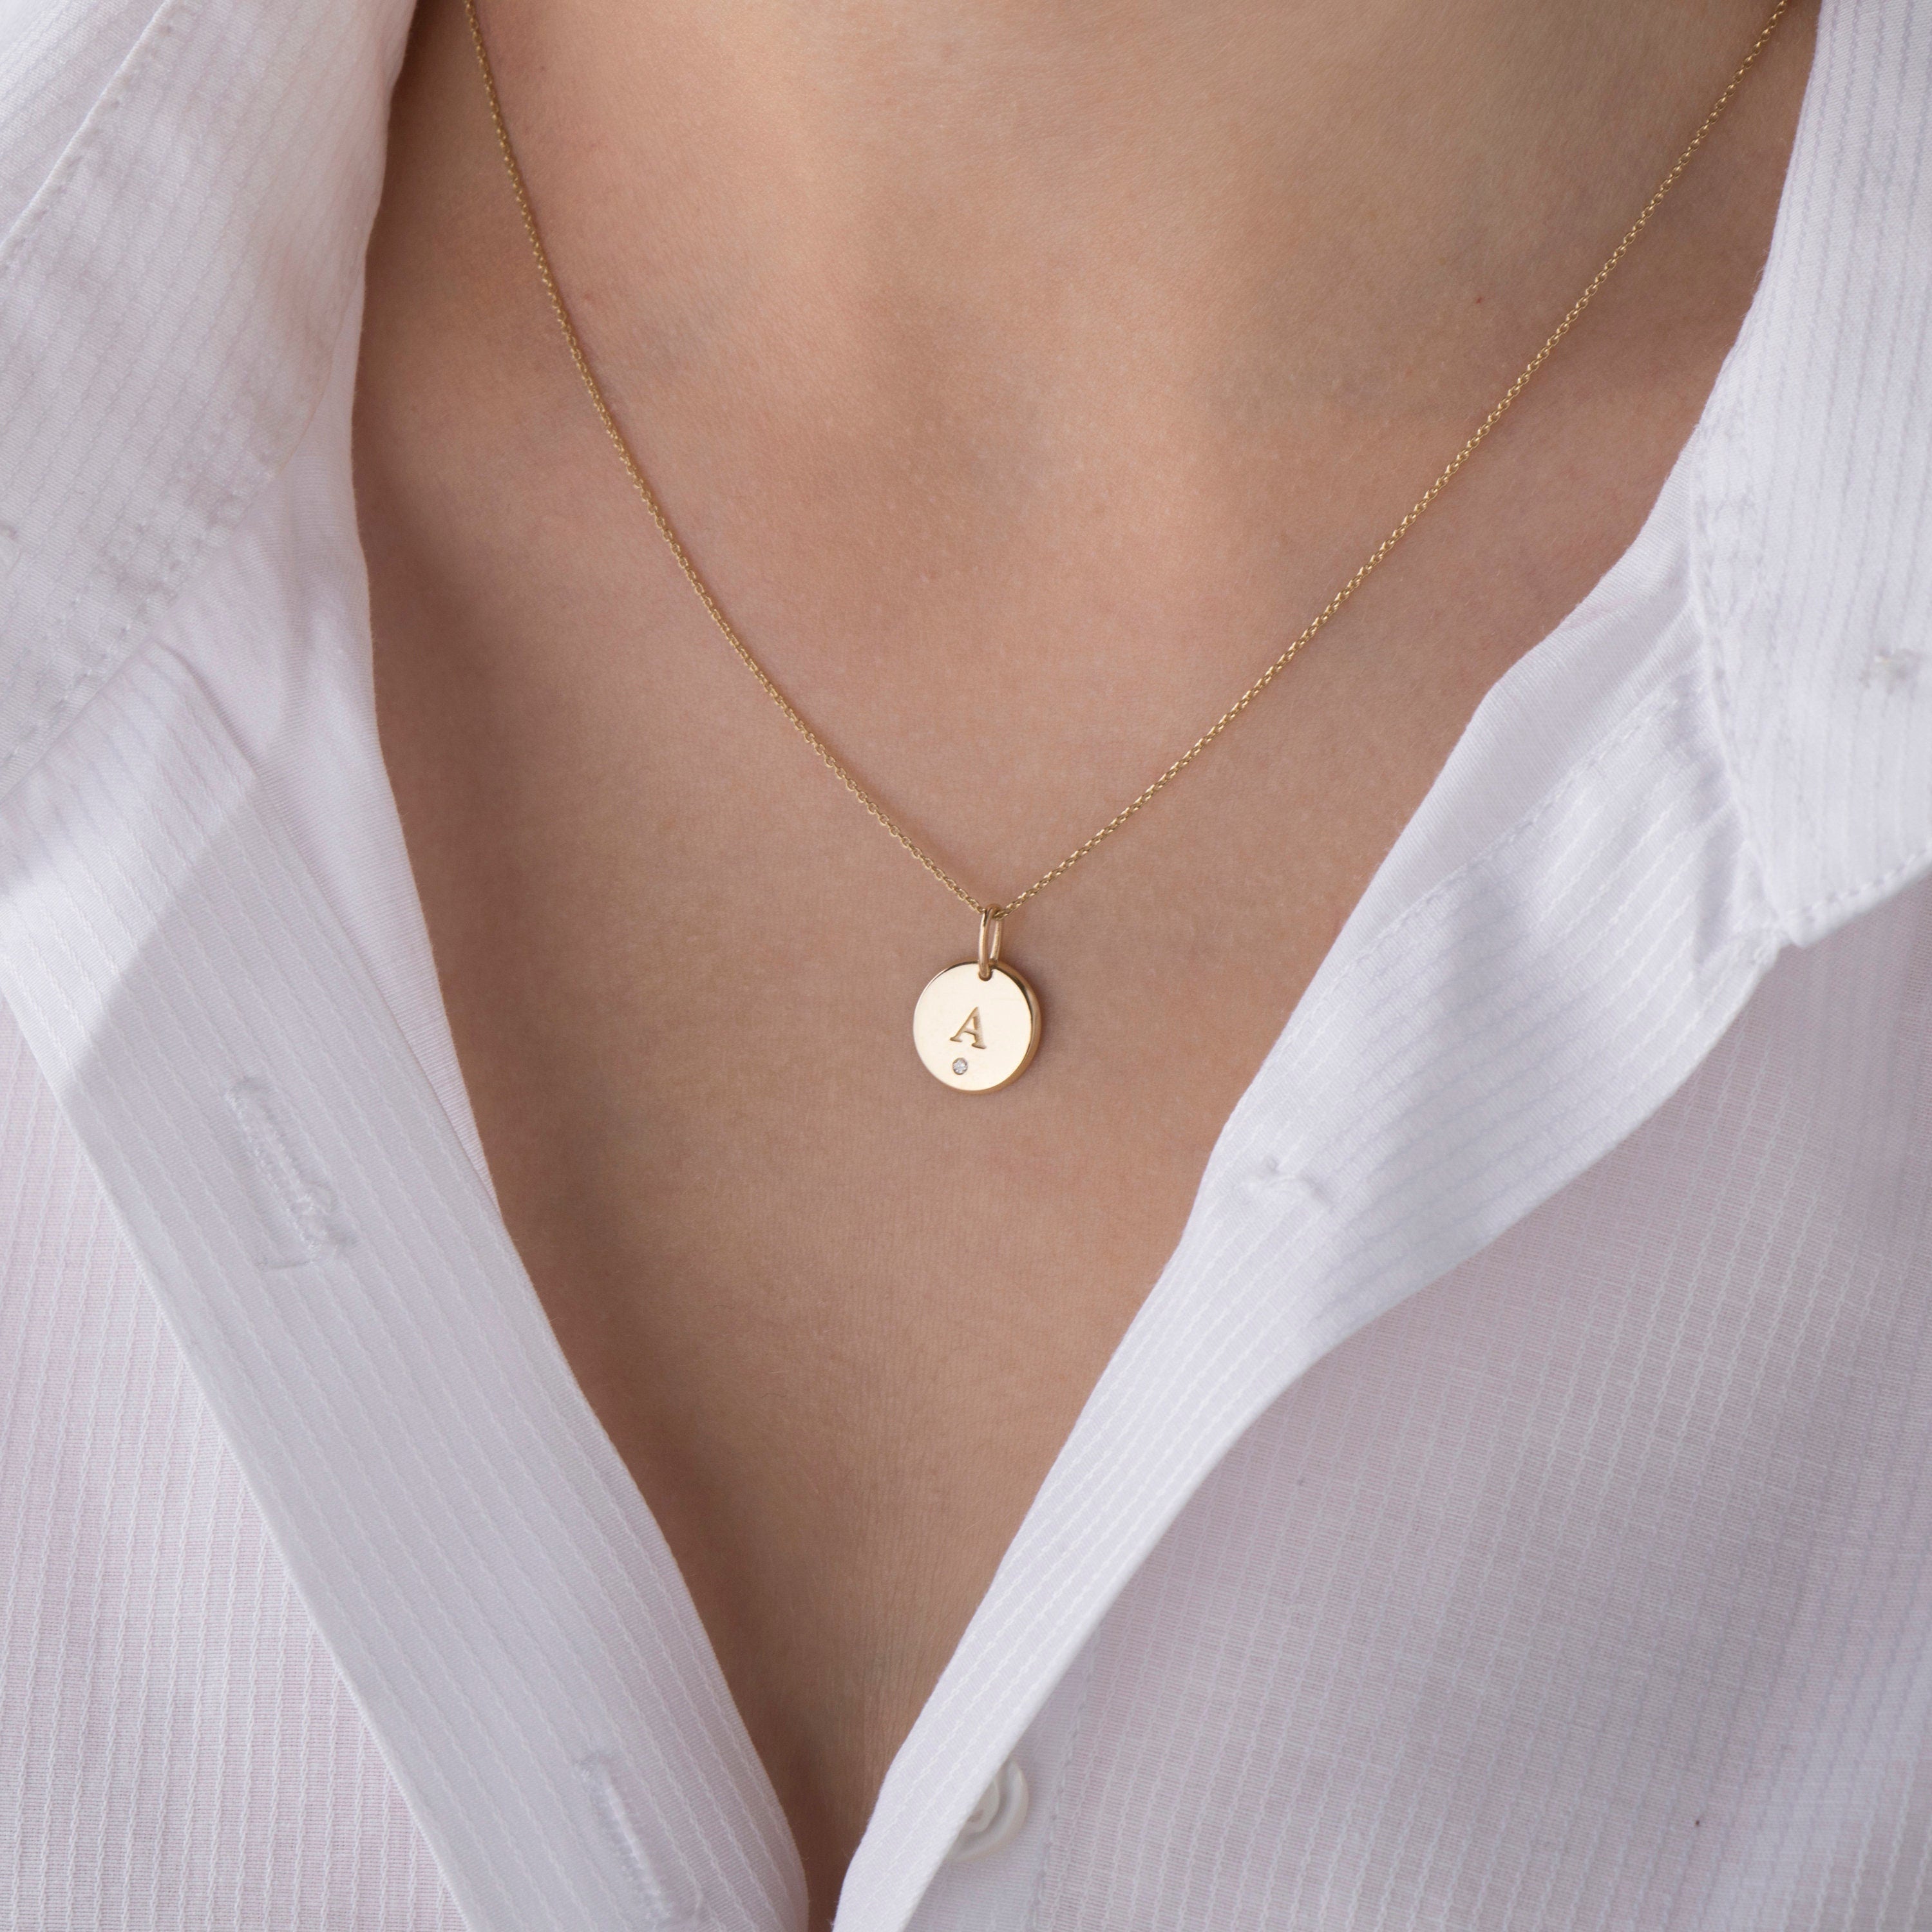 Birthstone Initial Pendant Necklace in 14K Gold